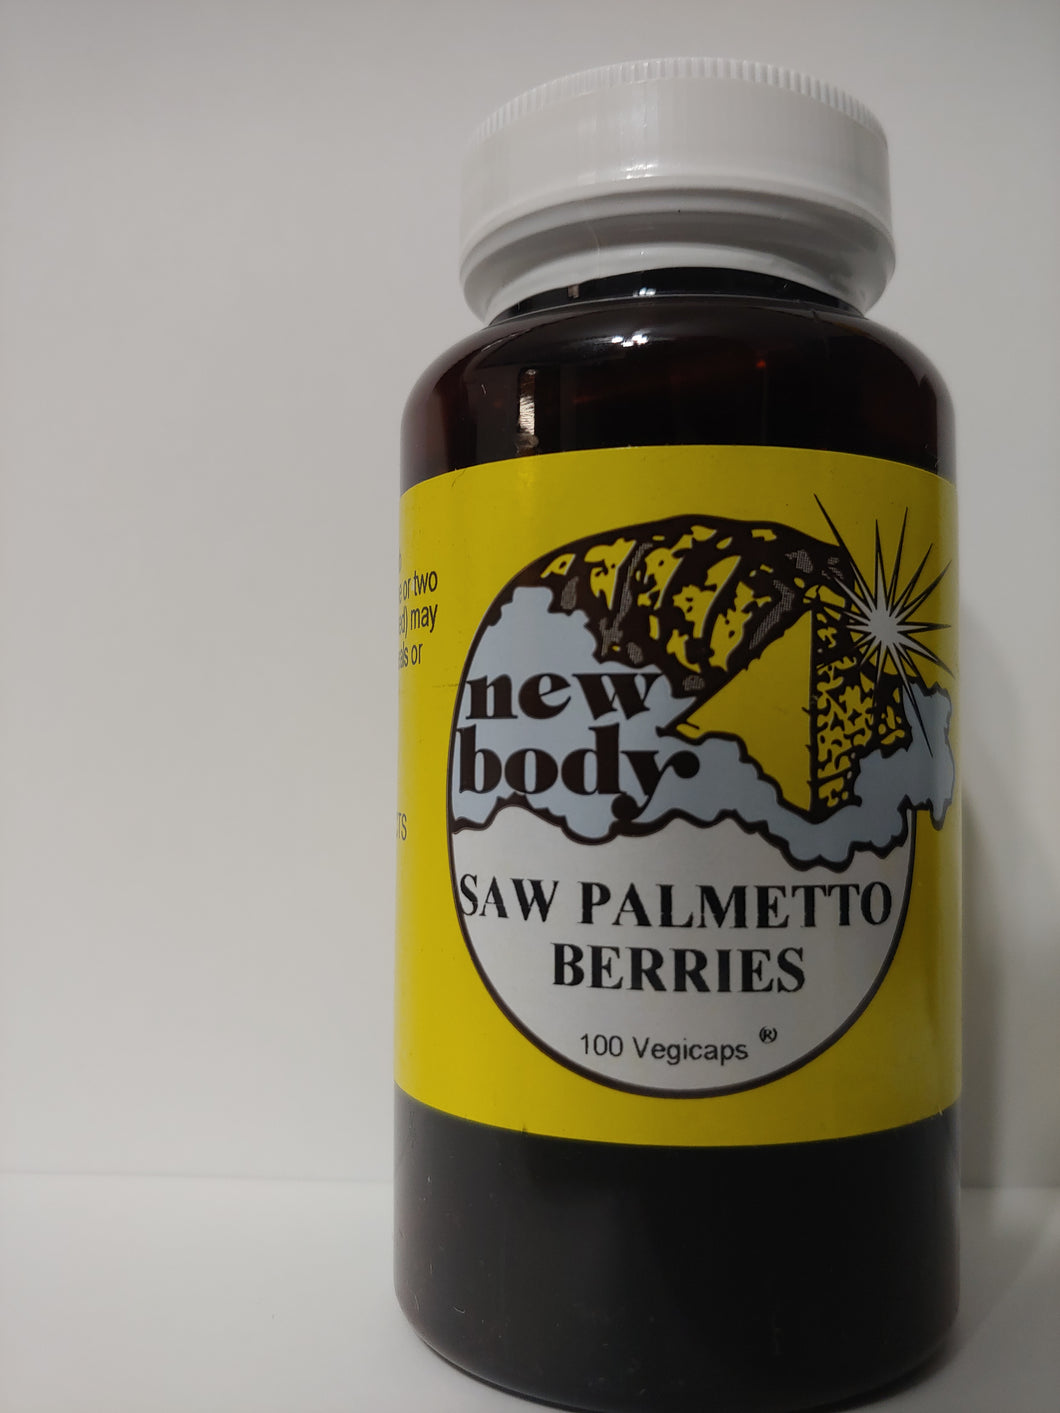 New Body Products Saw Palmetto Berries 100 Vegicaps 100 Vegicaps This Product Contains No Fillers, Binders, or Additives